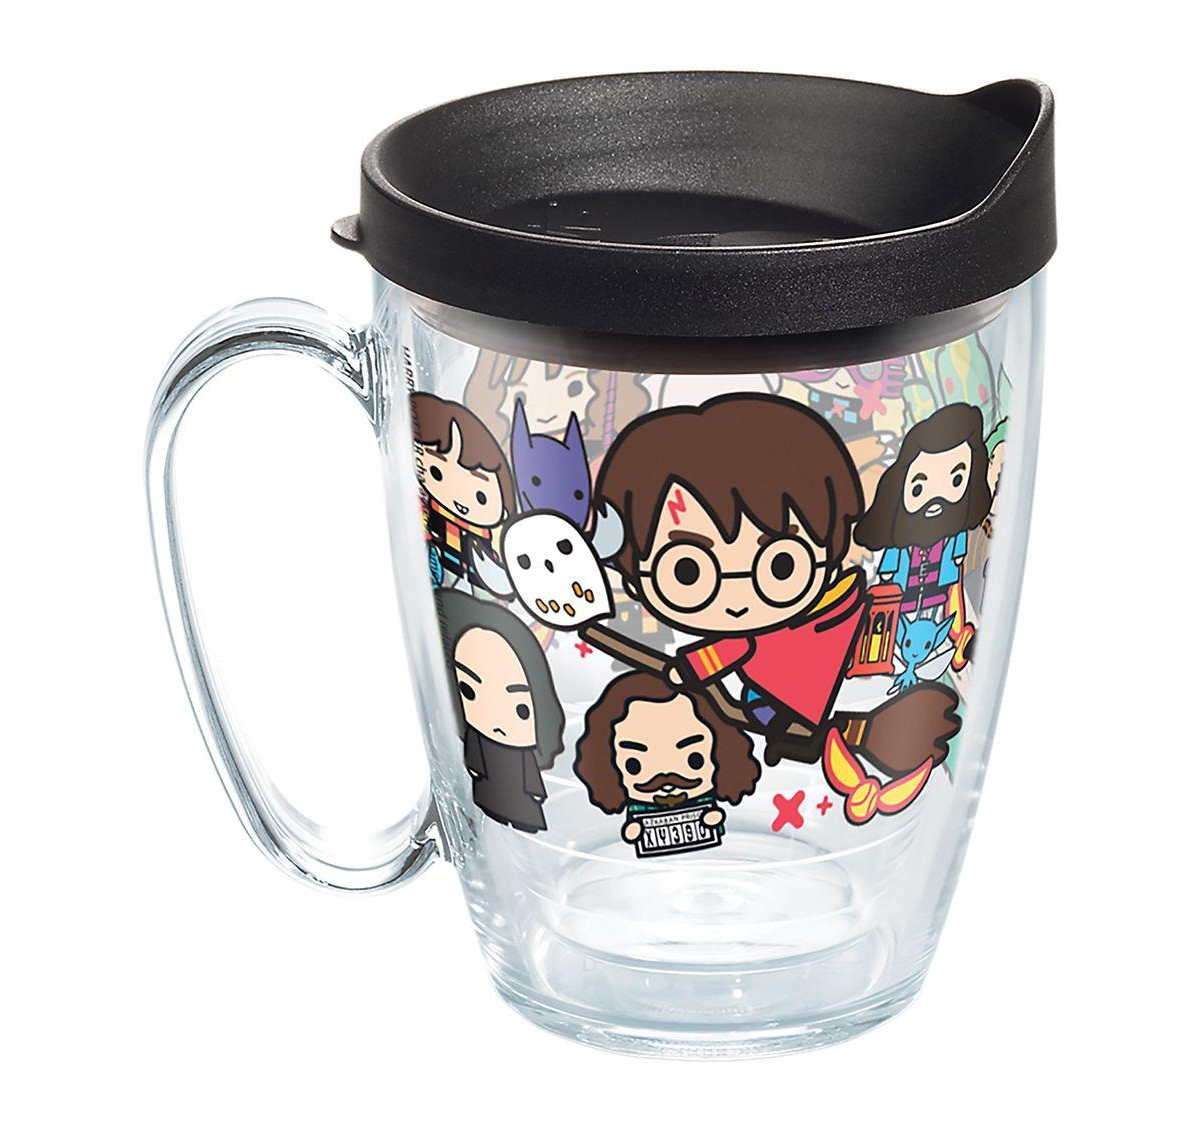 Tervis Tumbler Tervis Harry Potter - Group Charms Made In Usa Double Walled Insulated Tumbler Travel Cup Keeps Drin In Open Miscellaneous